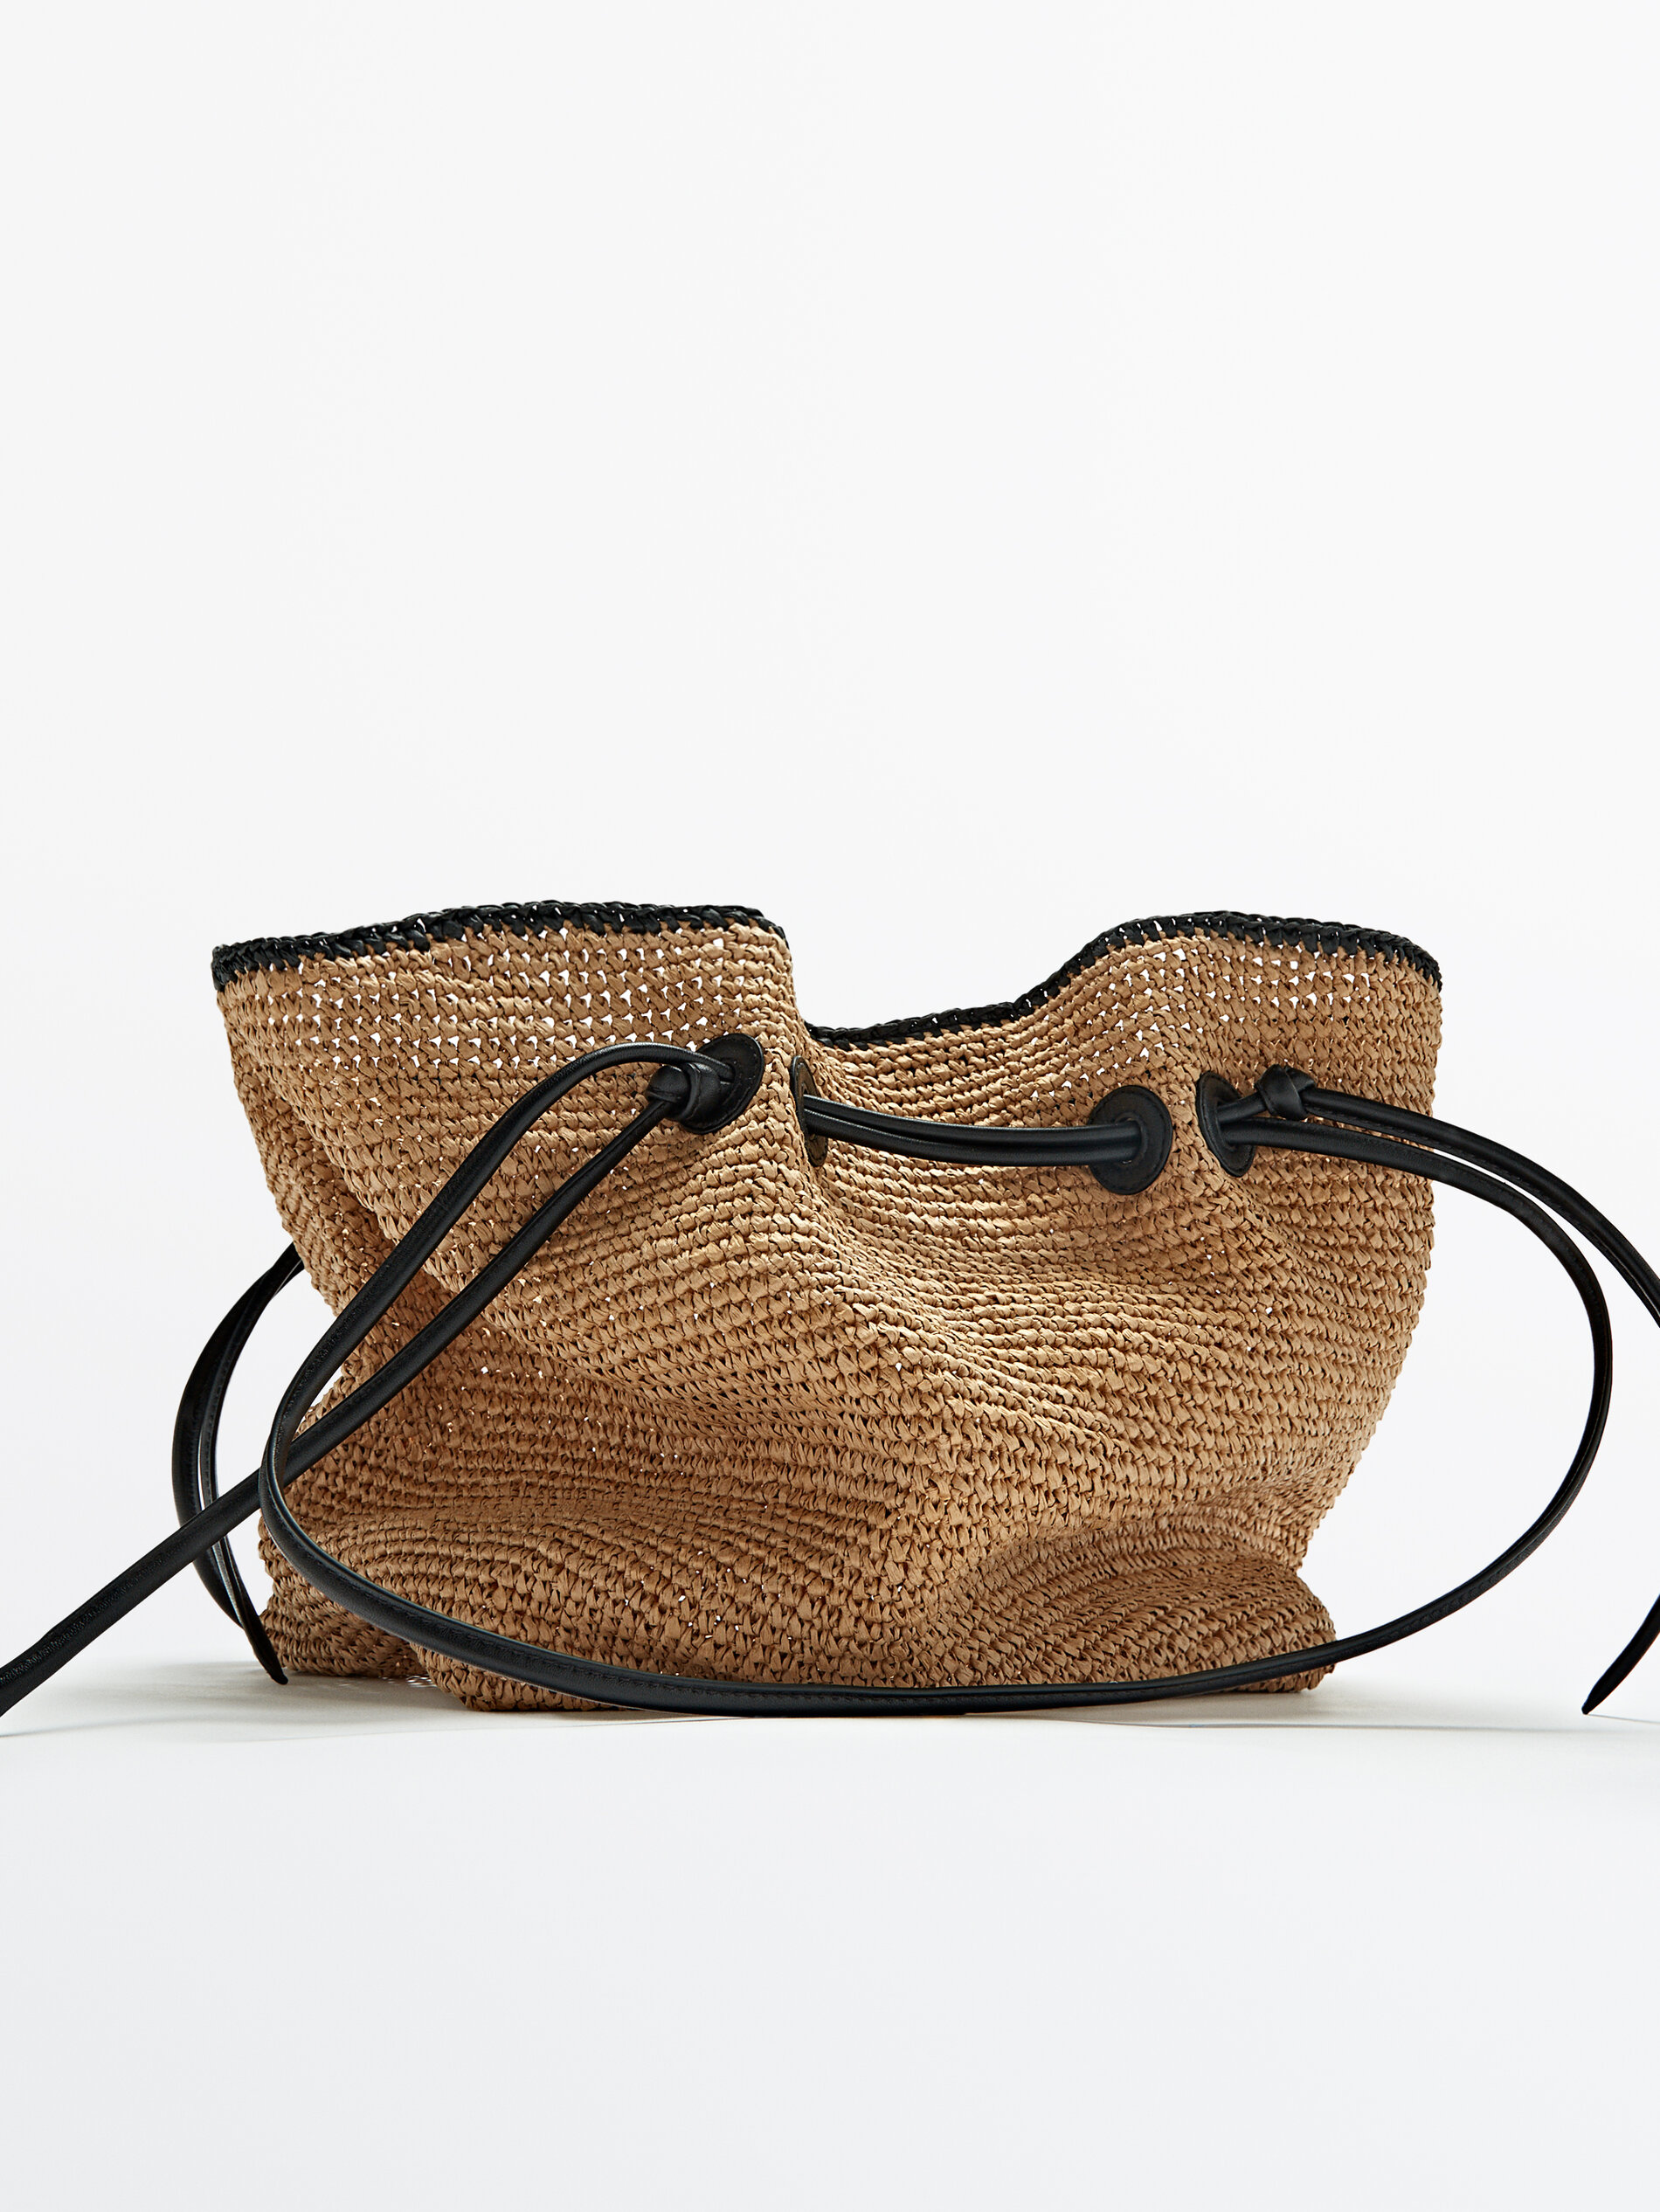 Isolate Correspondence Separate Massimo Dutti - Floral raffia tote bag with leather handles